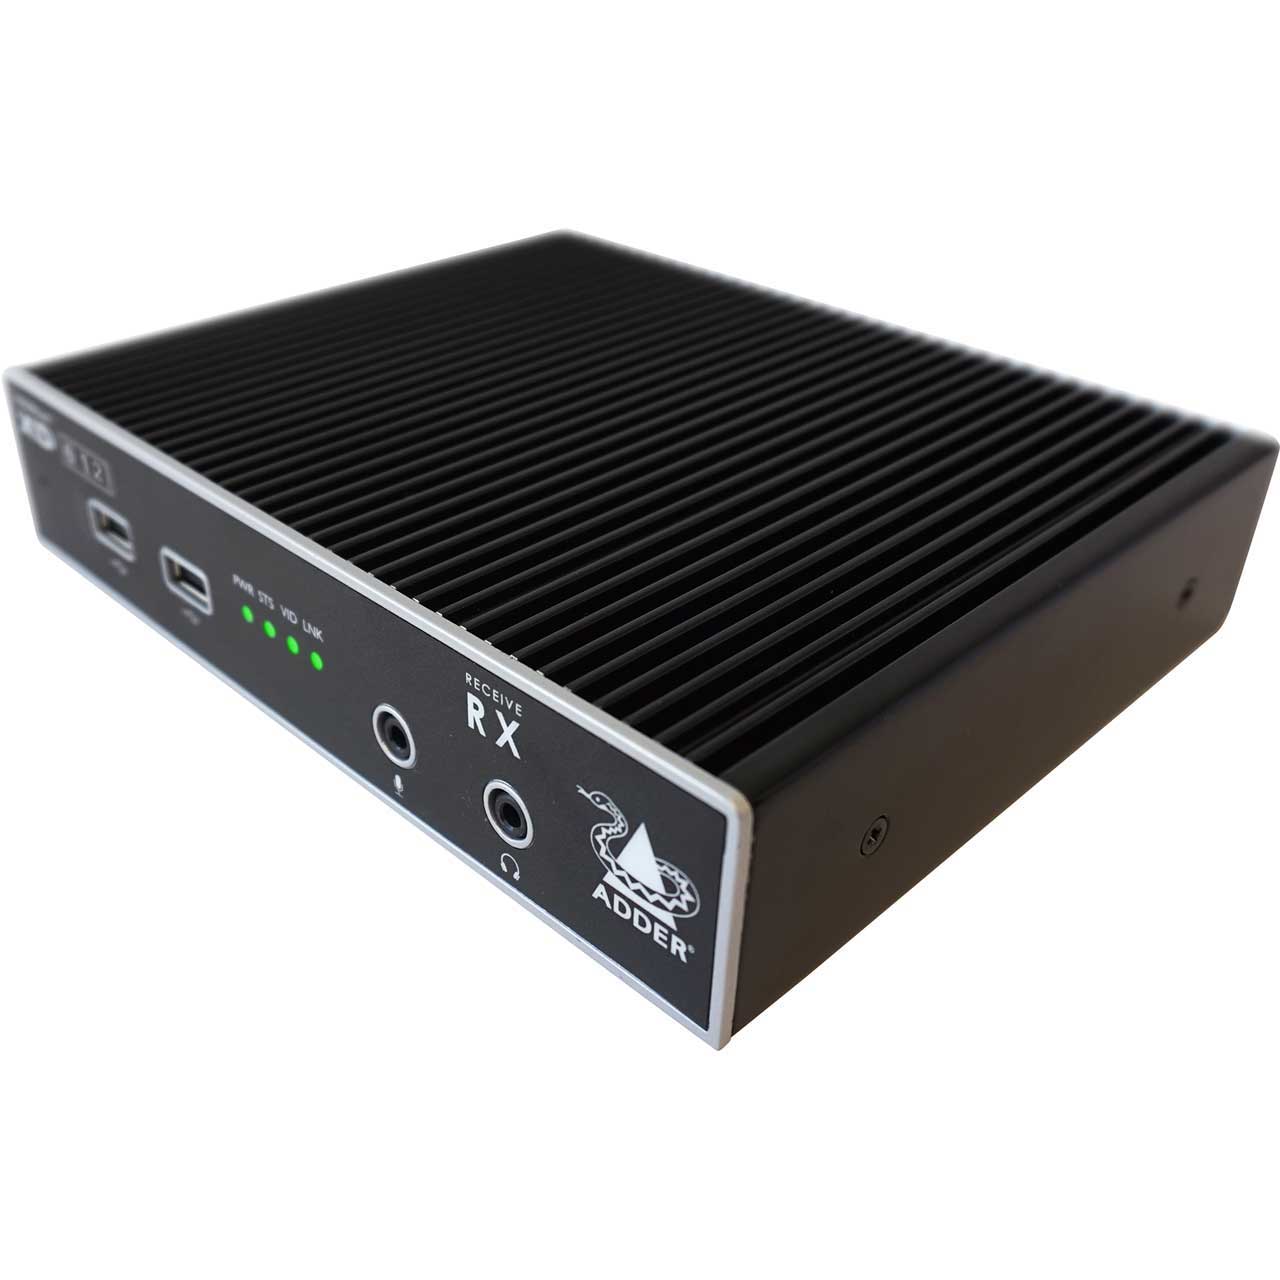 Adder XD612P-DP-US ADDERLink XD - Single HD/MST Dual HD High Performance IP KVM Extender Pair with US Mains Cables ADR-XD612P-DP-US